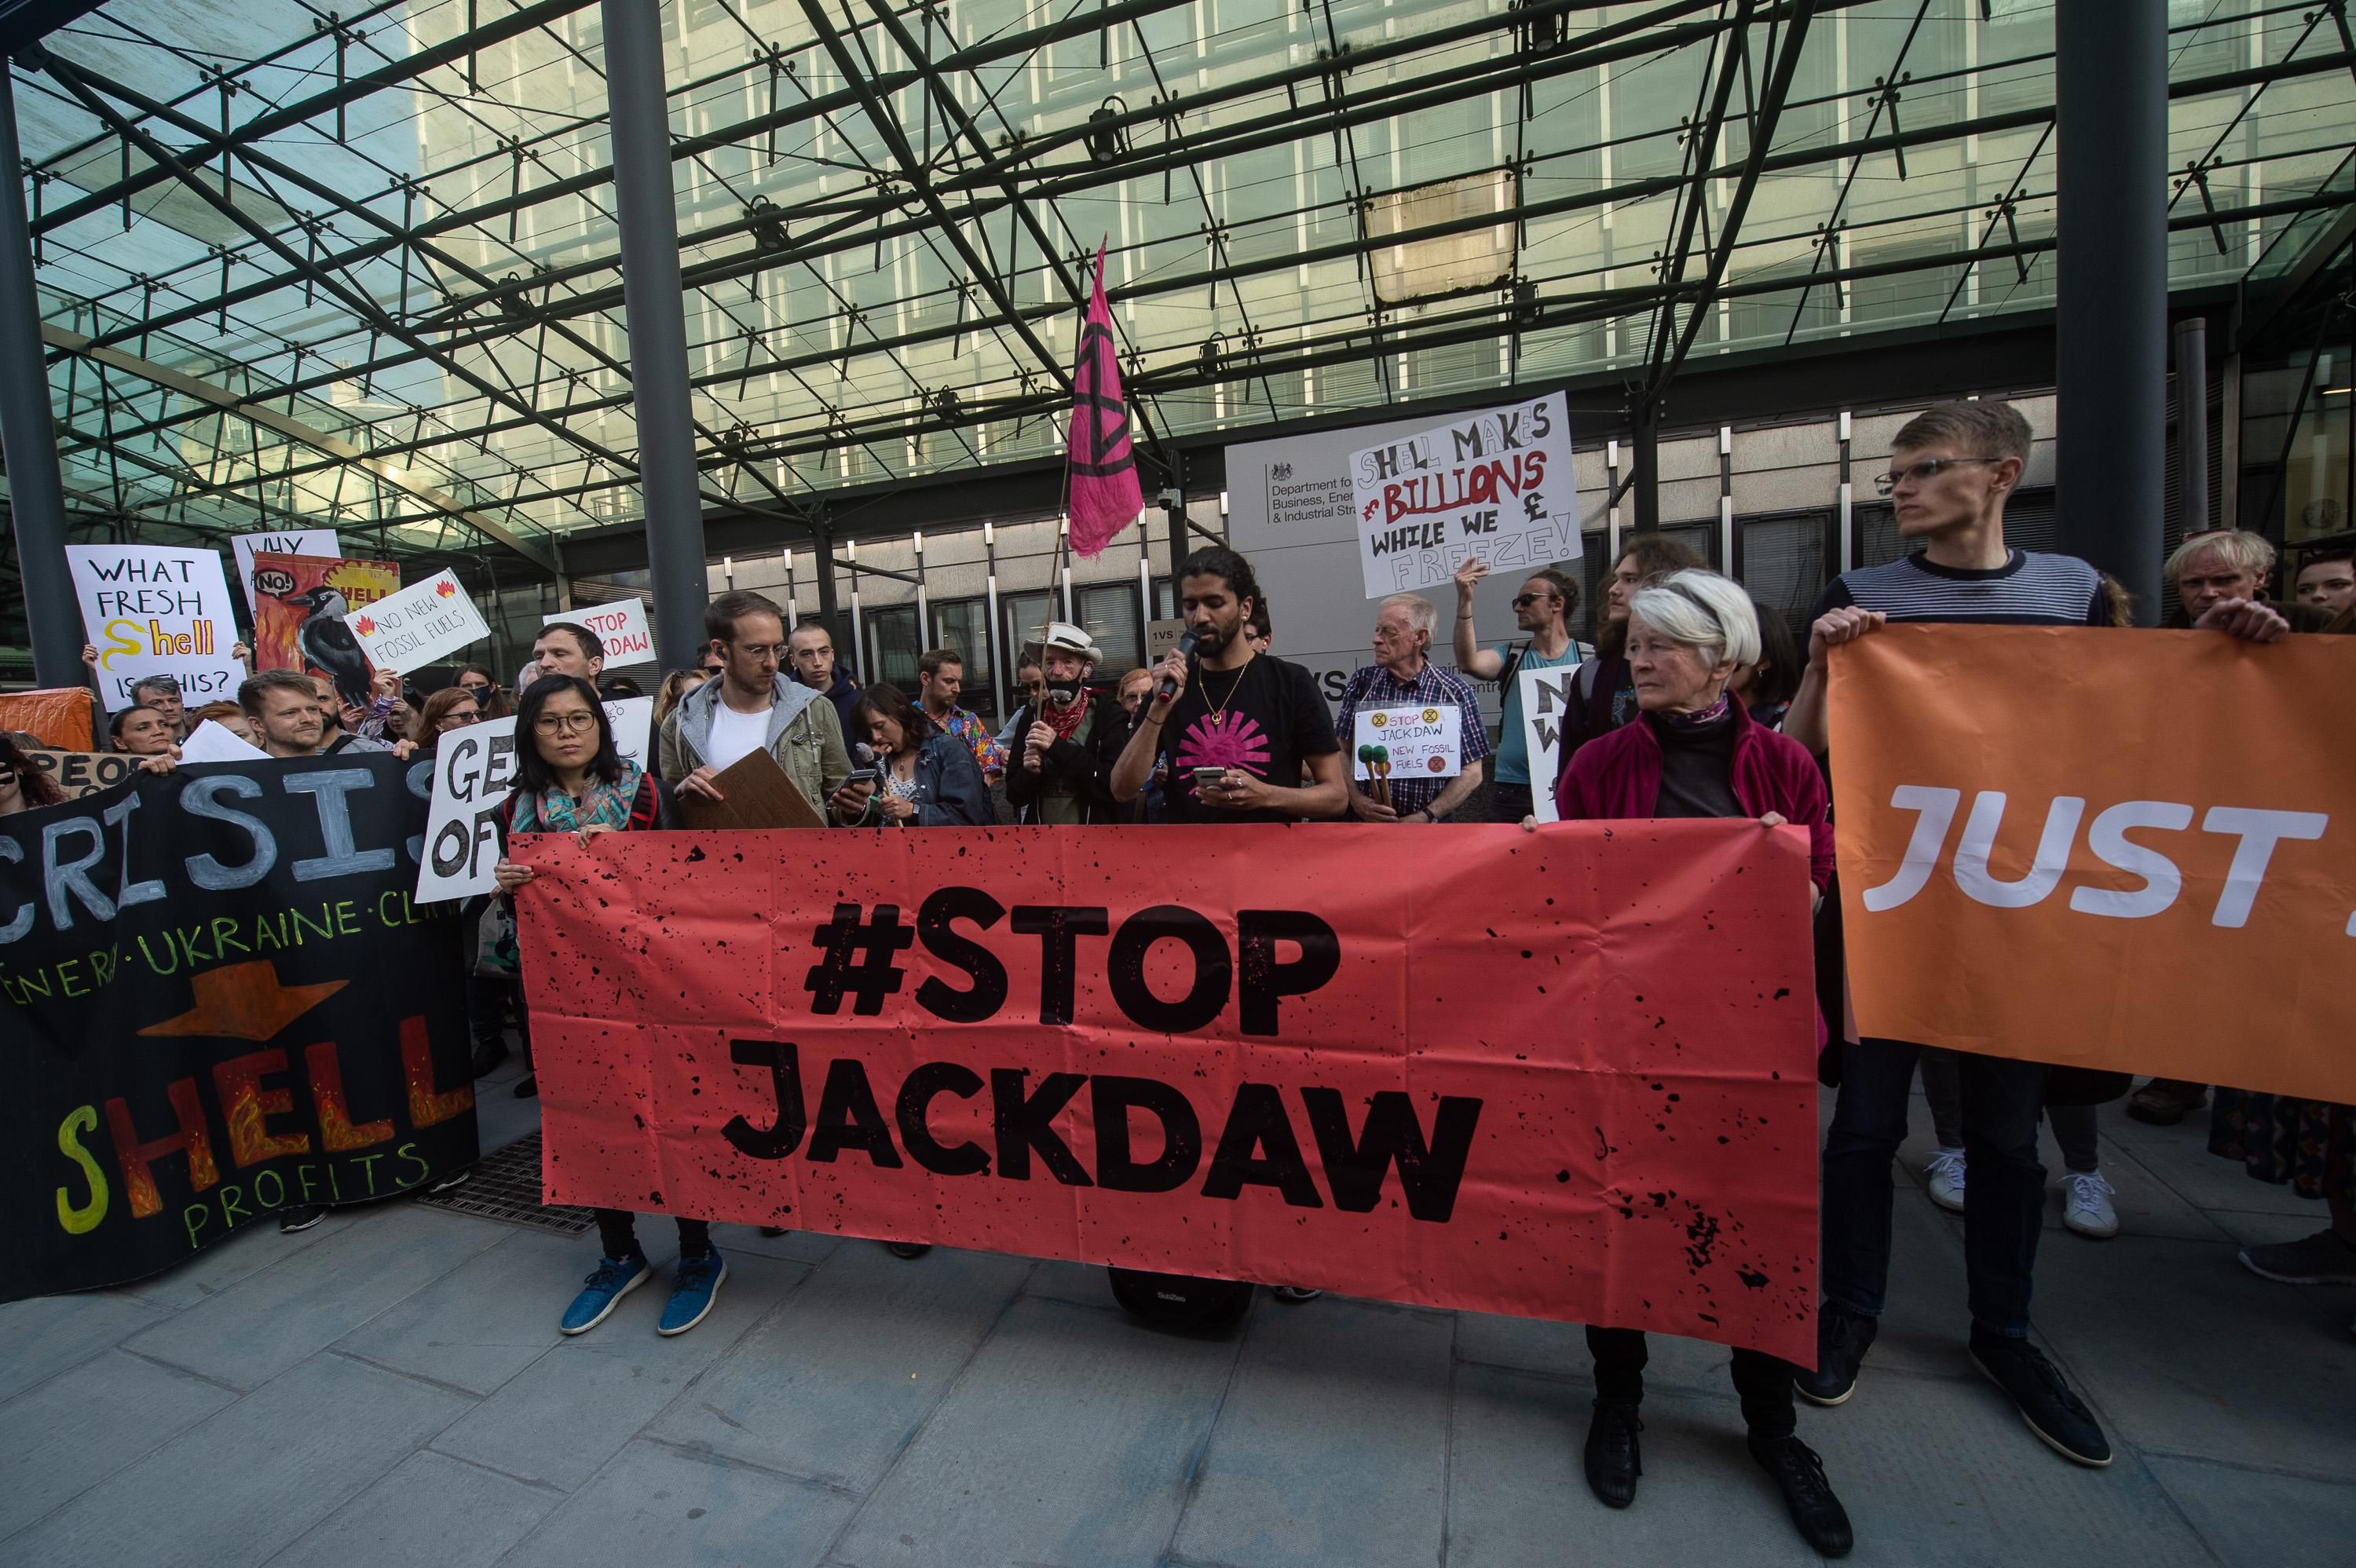 Environmental activists demonstrate against the proposed Jackdaw gas field on June 2, 2022 in London.